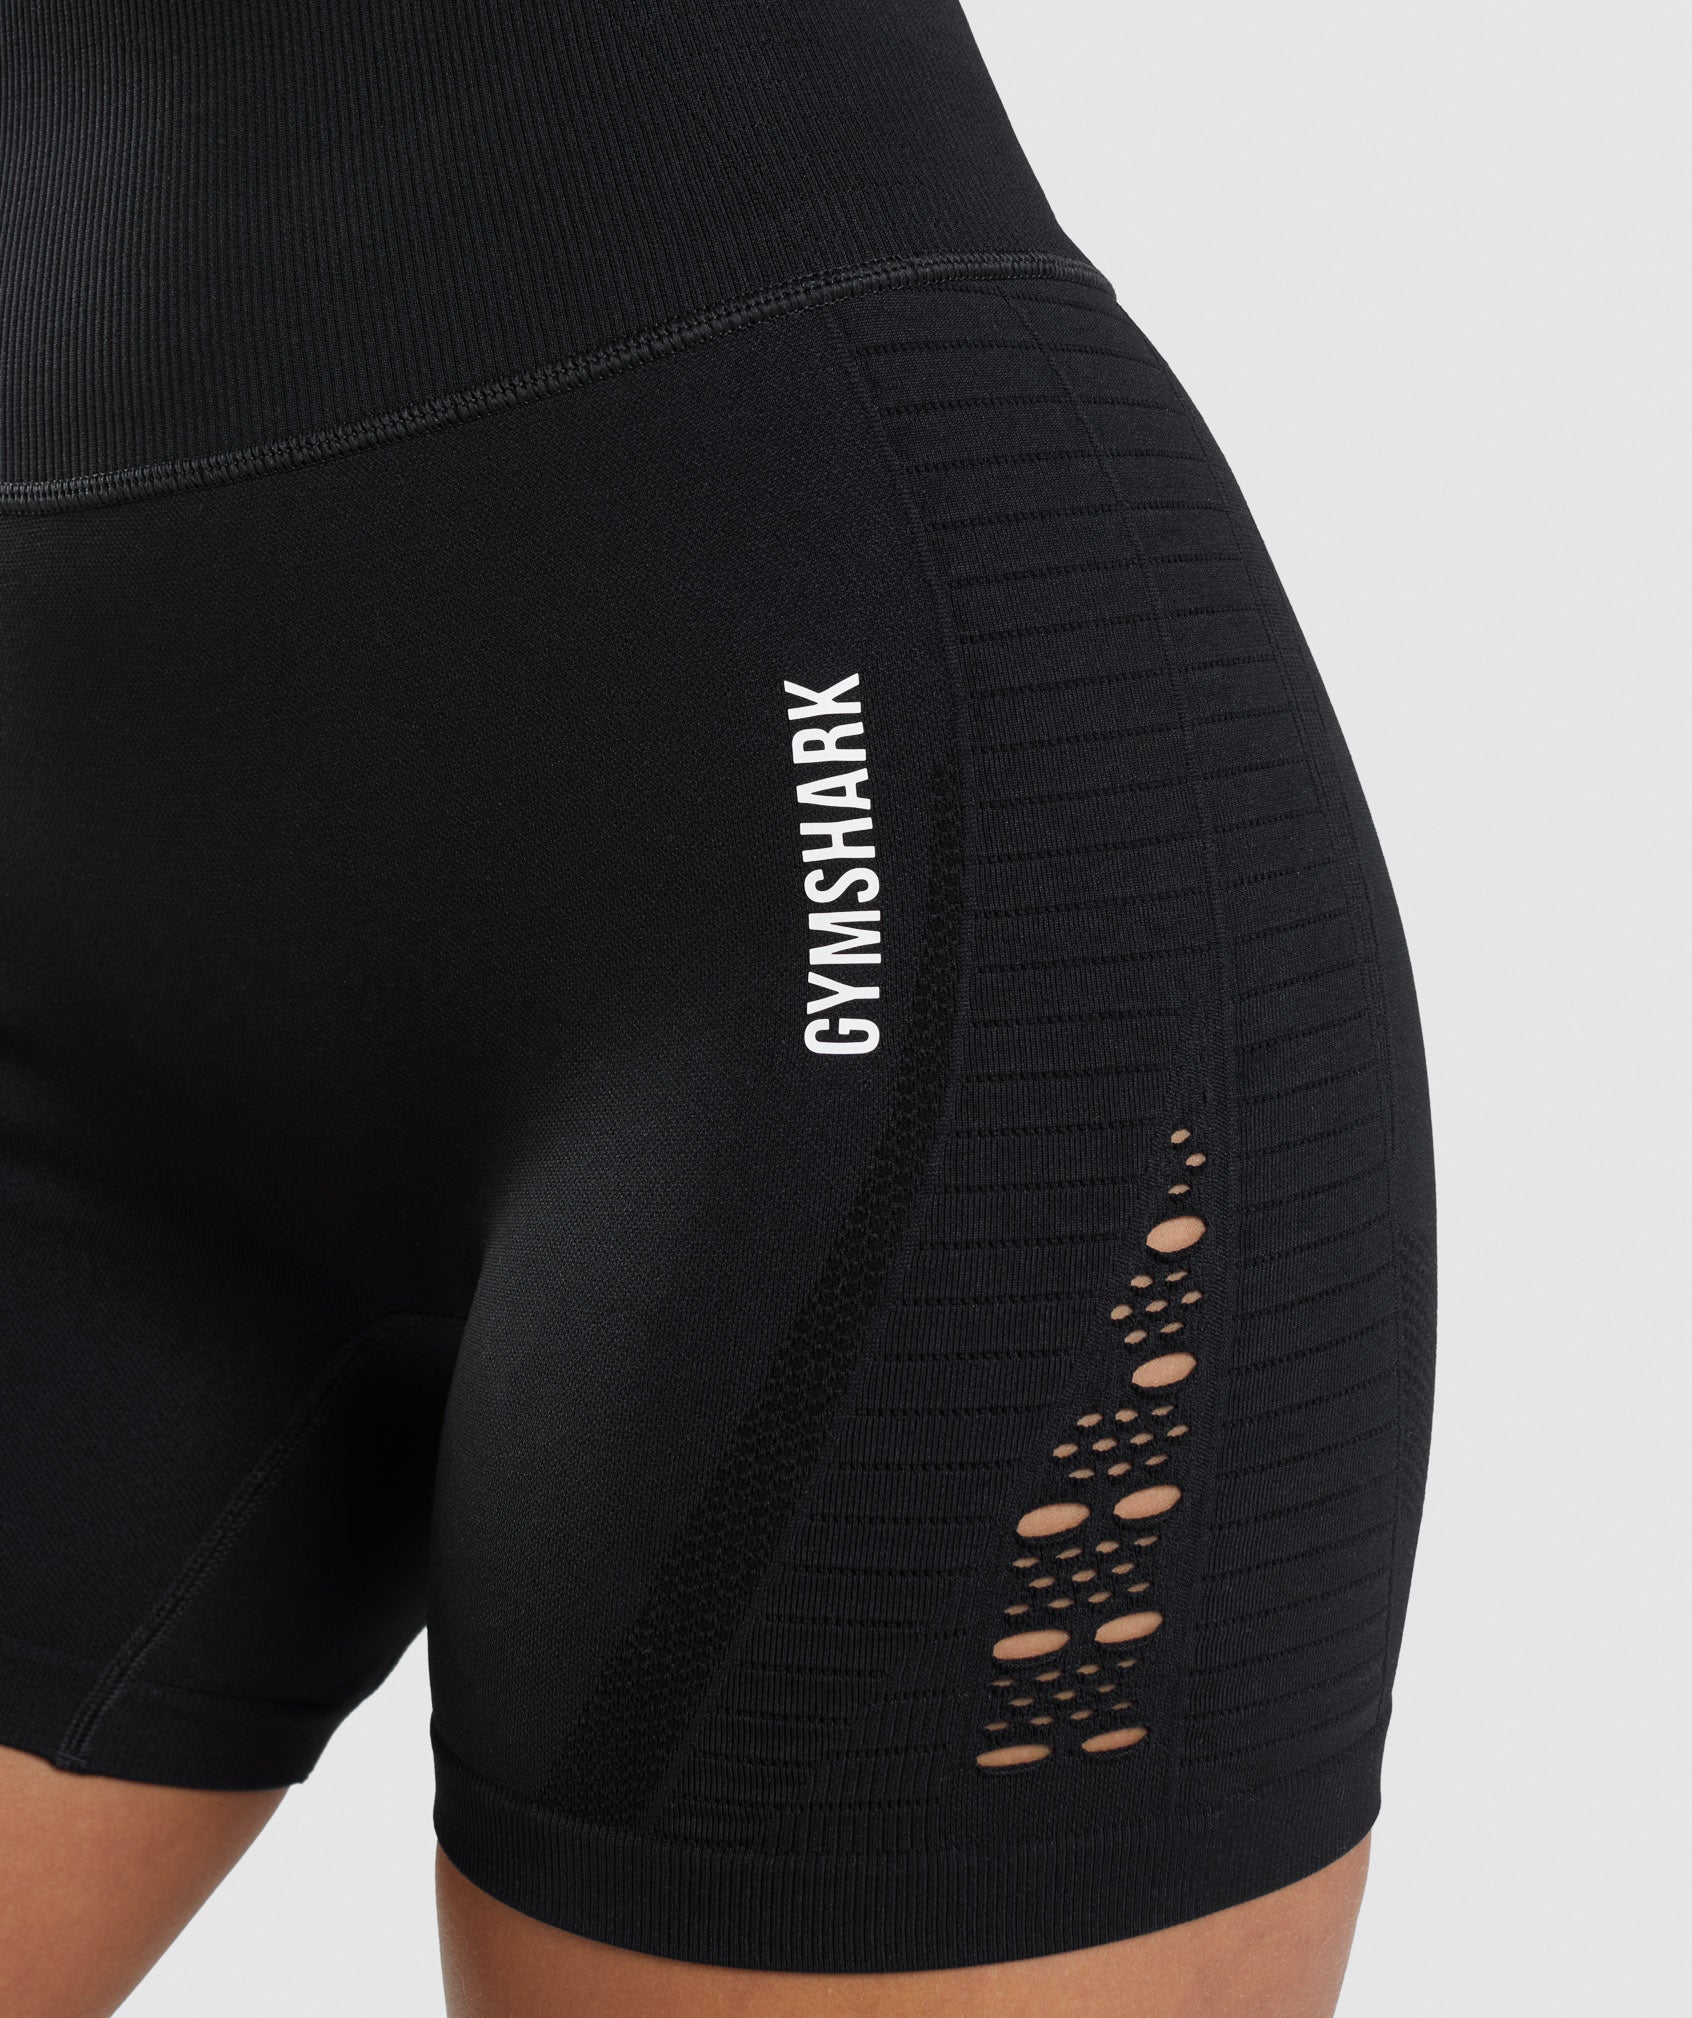 Energy Seamless Shorts in Black